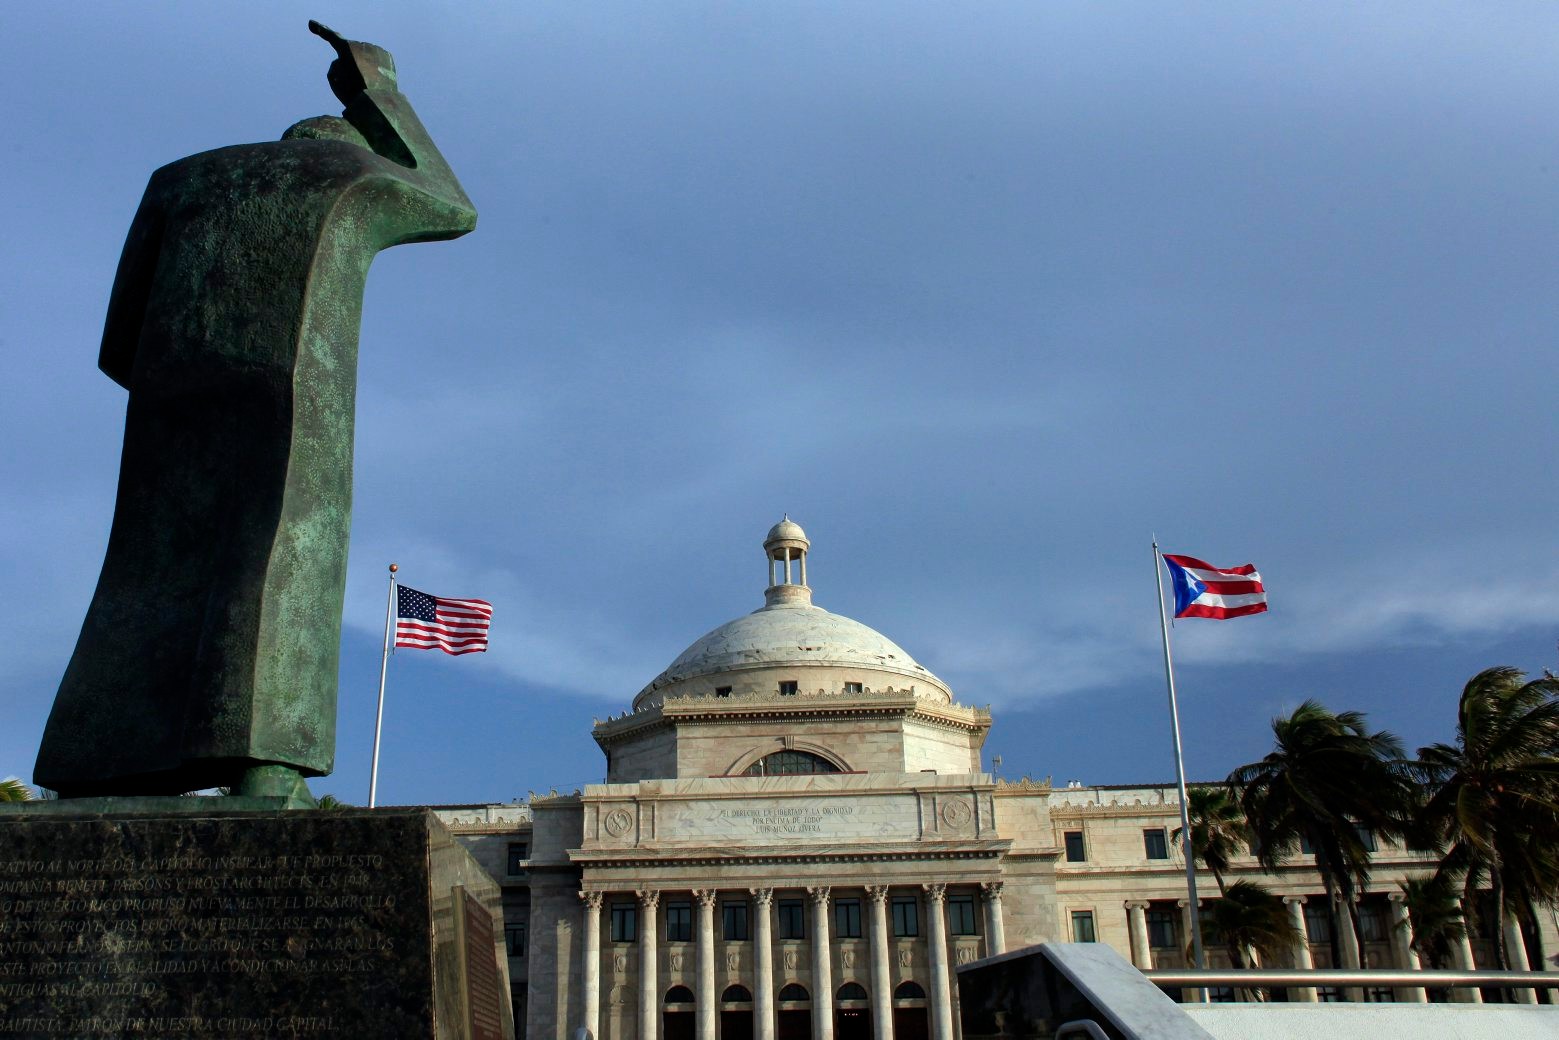 FILE - In this Wednesday, July 29, 2015, file photo, a bronze statue of San Juan Bautista stands in front of Puerto Ricoís Capitol as U.S. and Puerto Rican flags fly in San Juan, Puerto Rico. After months of pleading from the government of Puerto Rico, the U.S. Congress agreed on Wednesday, May 18, 2016, to help the territory restructure its massive public debt. (AP Photo/Ricardo Arduengo, File) PUERTO RICO DEBT CRISIS